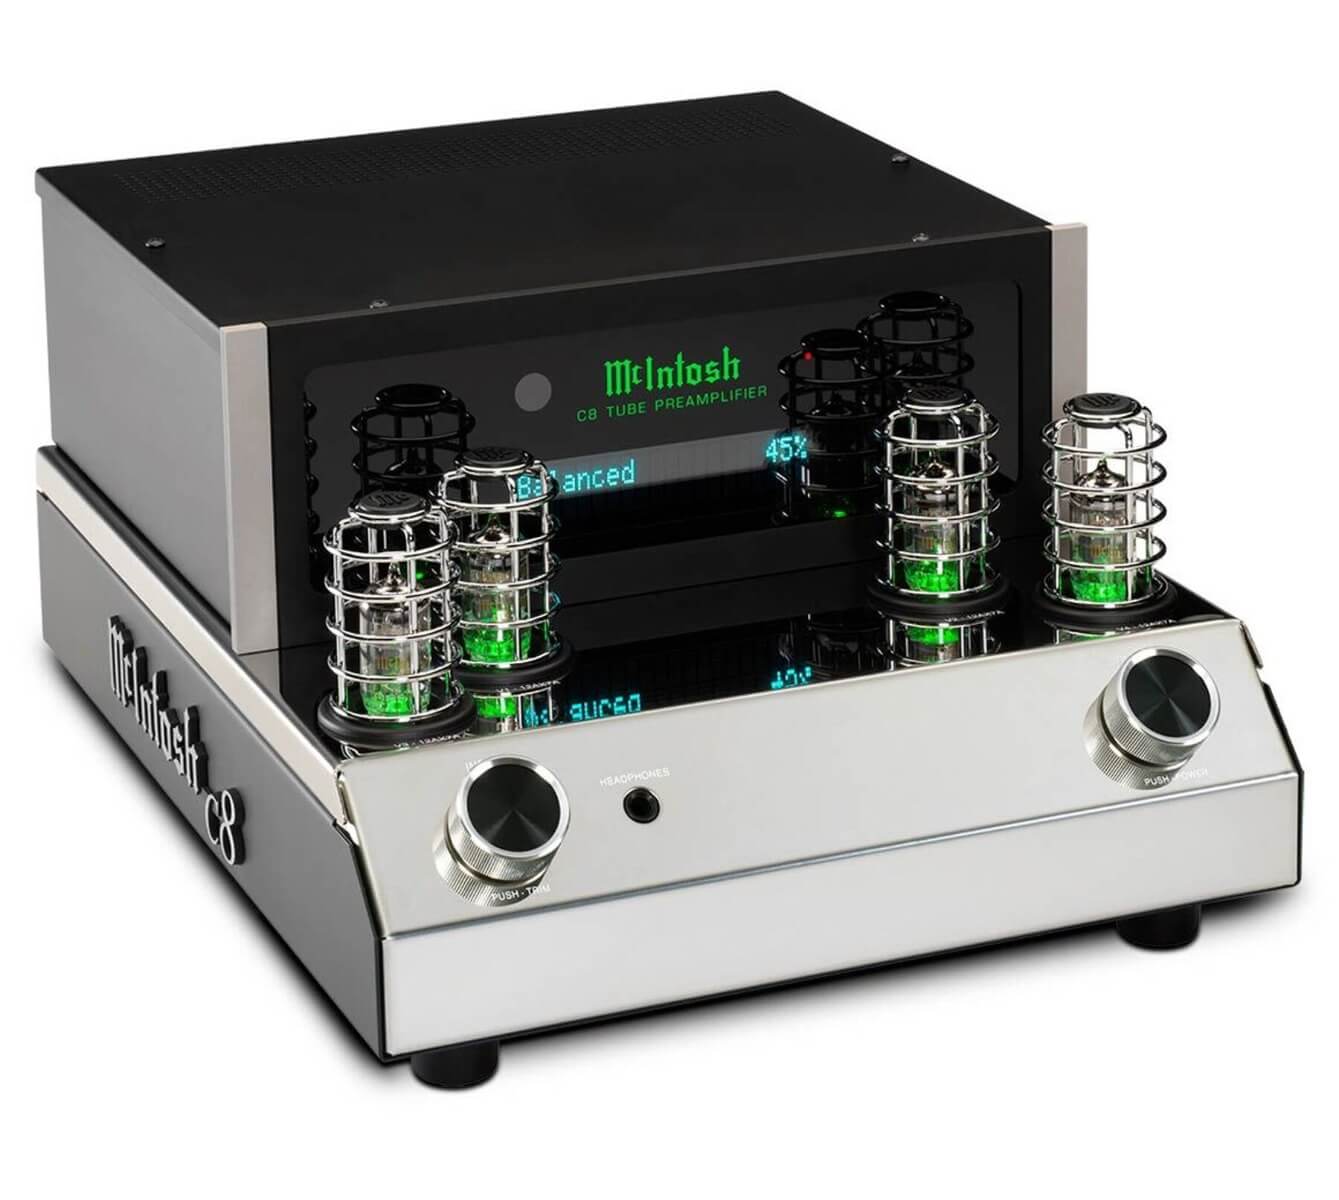 Elevate Your Audio Experience with the McIntosh C8 Valve Preamplifier - A Nottingham Hi-Fi Exclusive